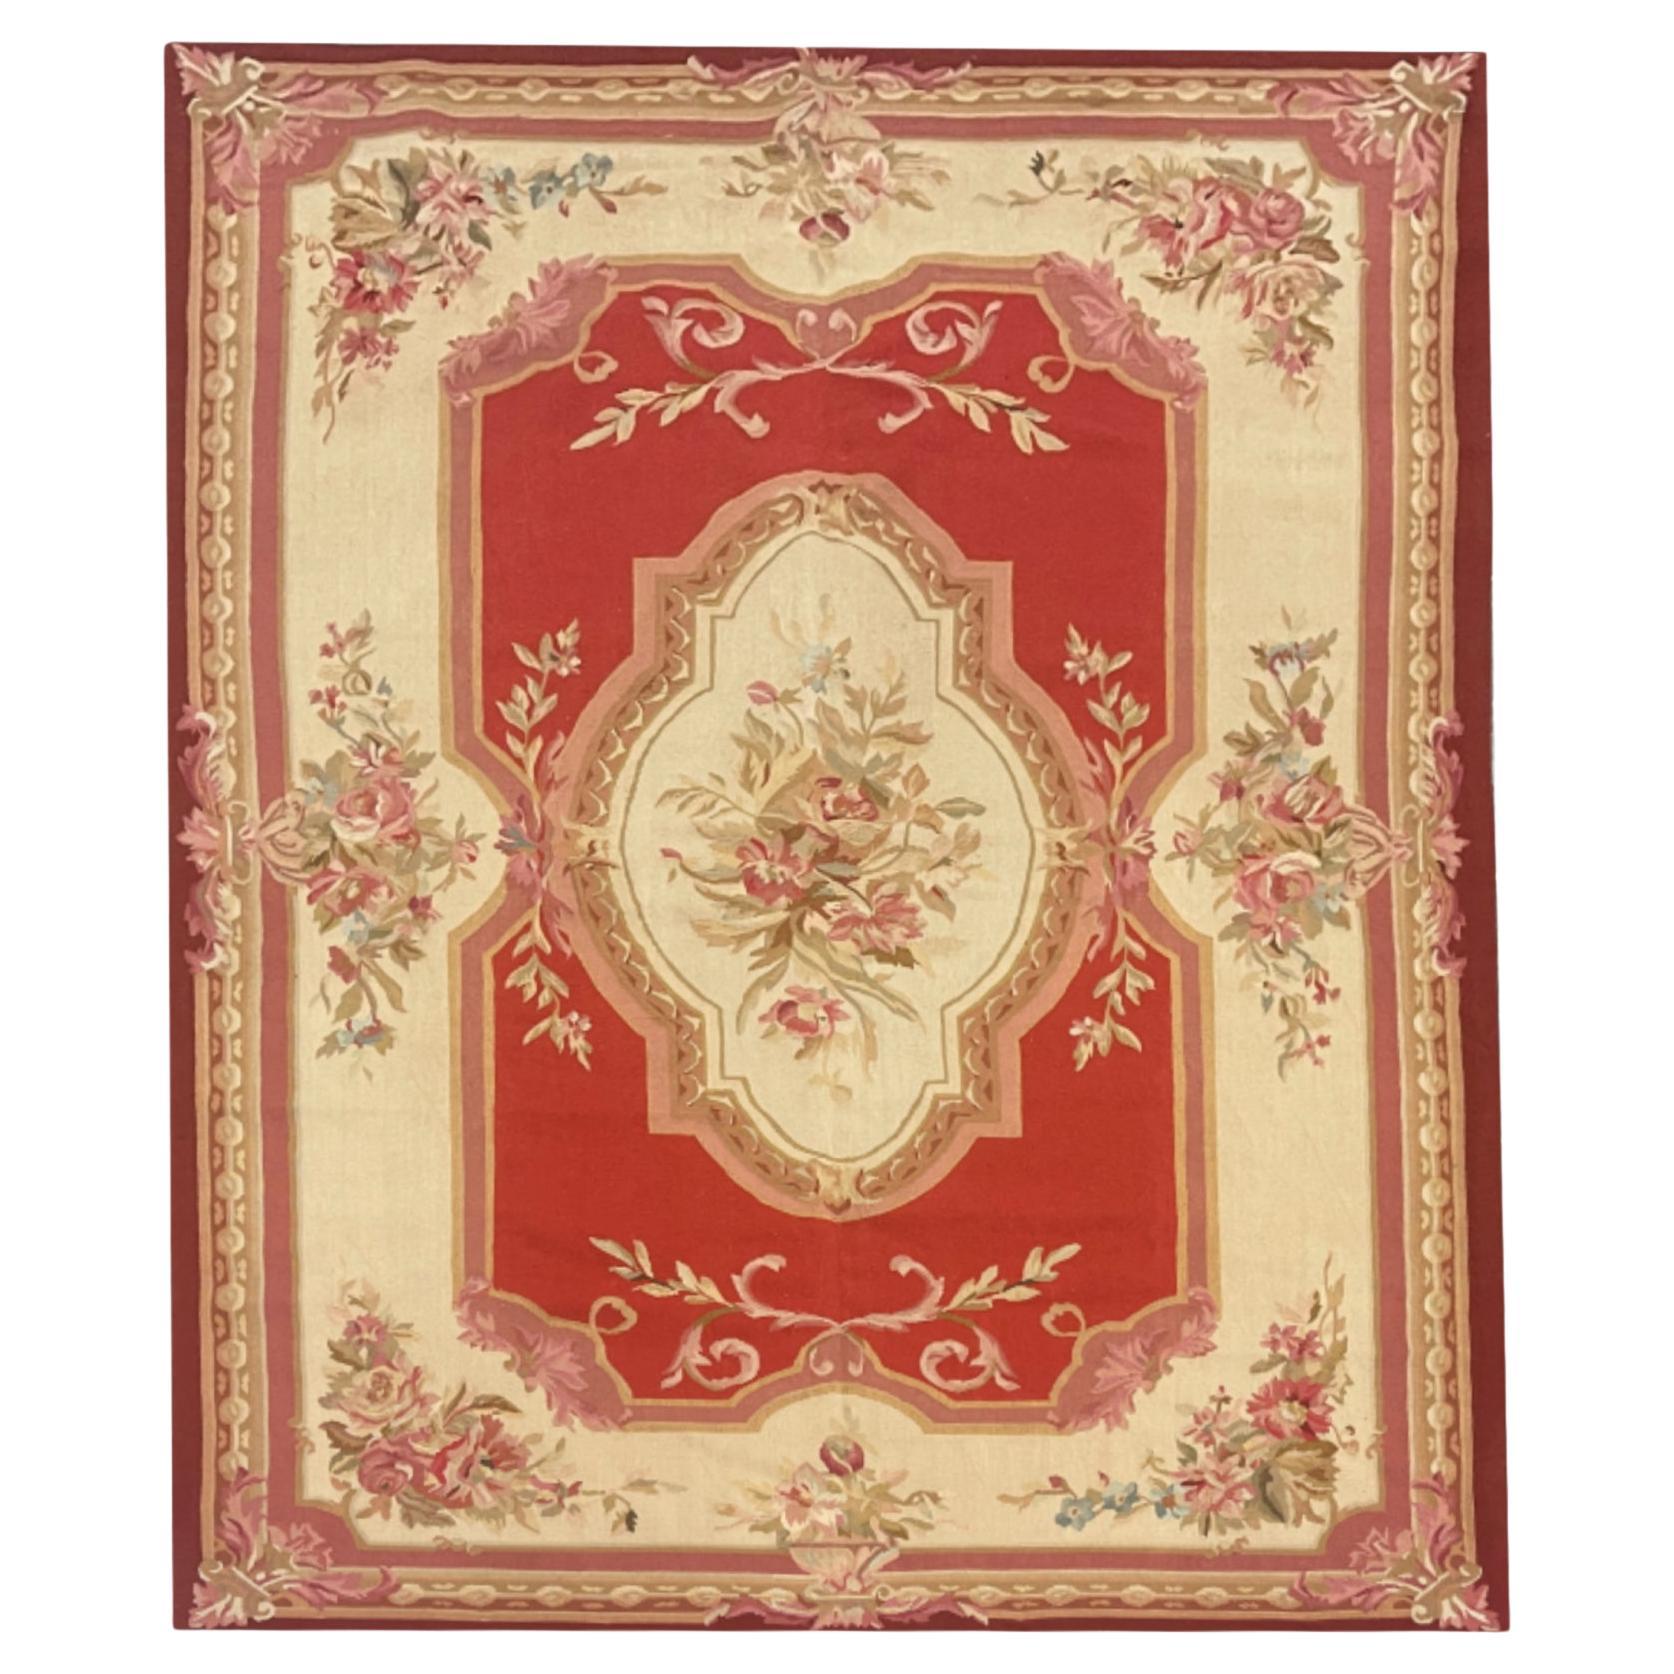 Handmade Carpet Vintage Aubusson Rug 1980 French- Red and Beige Wool Rugs